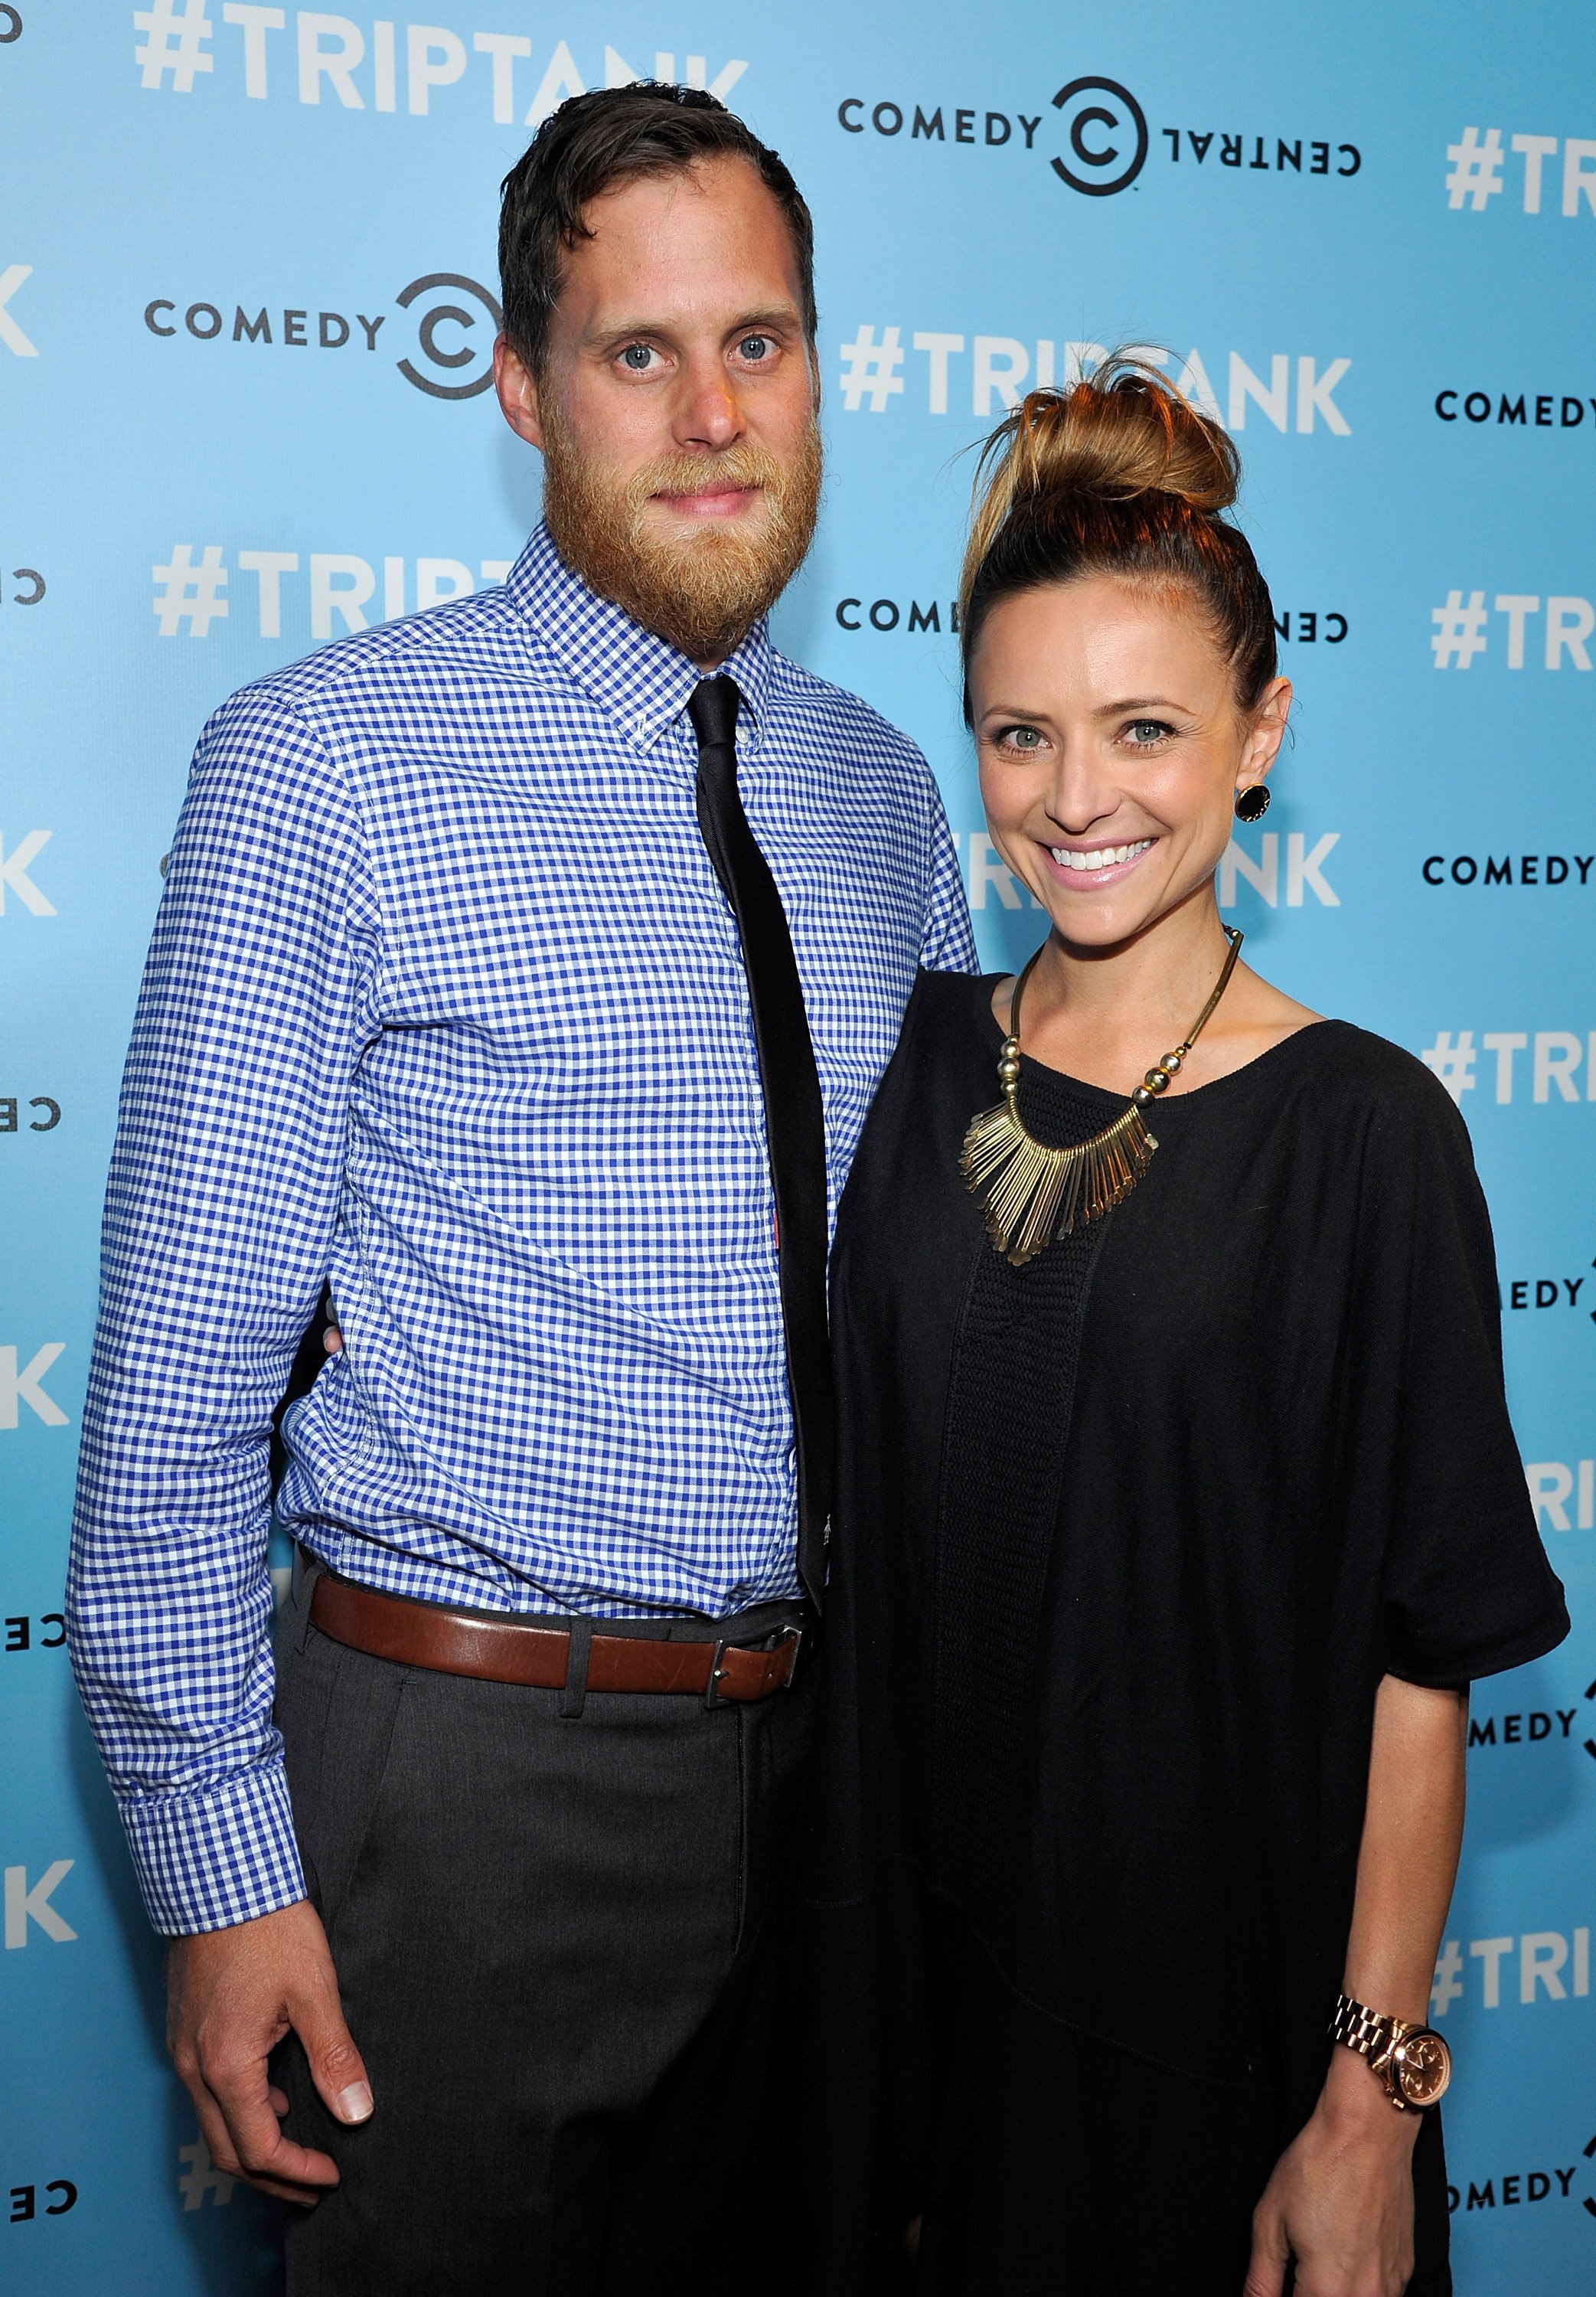 Brandon Breault and Christine Lakin at Comedy Central's "TripTank" premiere party in 2014 | Source: Getty Images